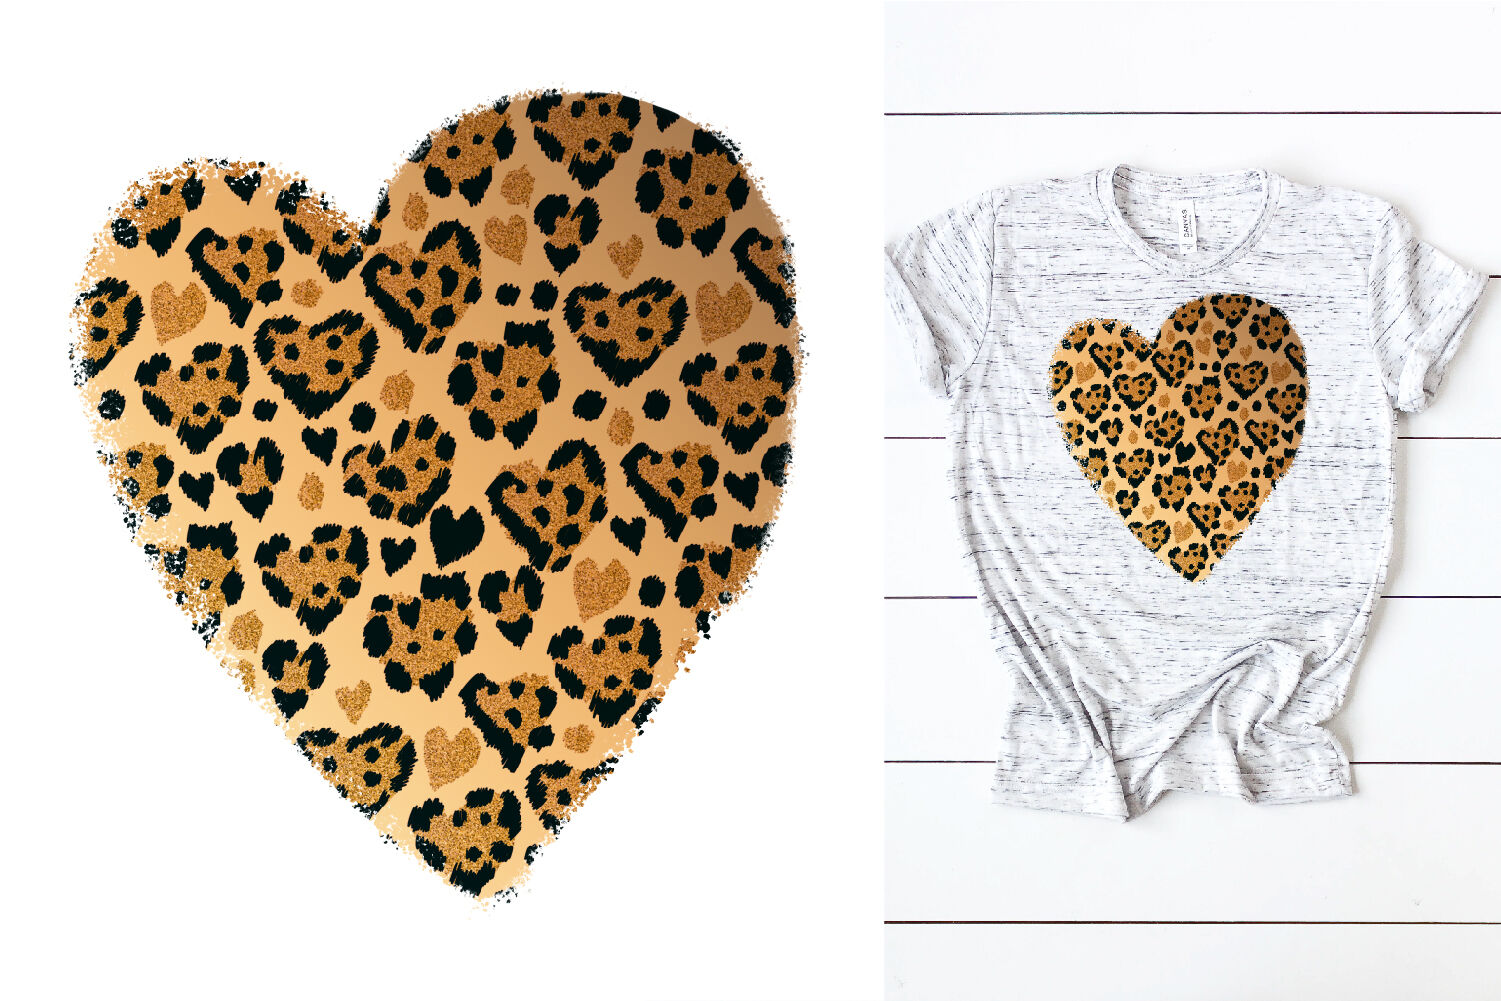 Sublimation Sublimation xoxo Love Design leopard Valentine's Day PNG dtg Love png Rainbow png Printable Valentines Png XOXO PNG